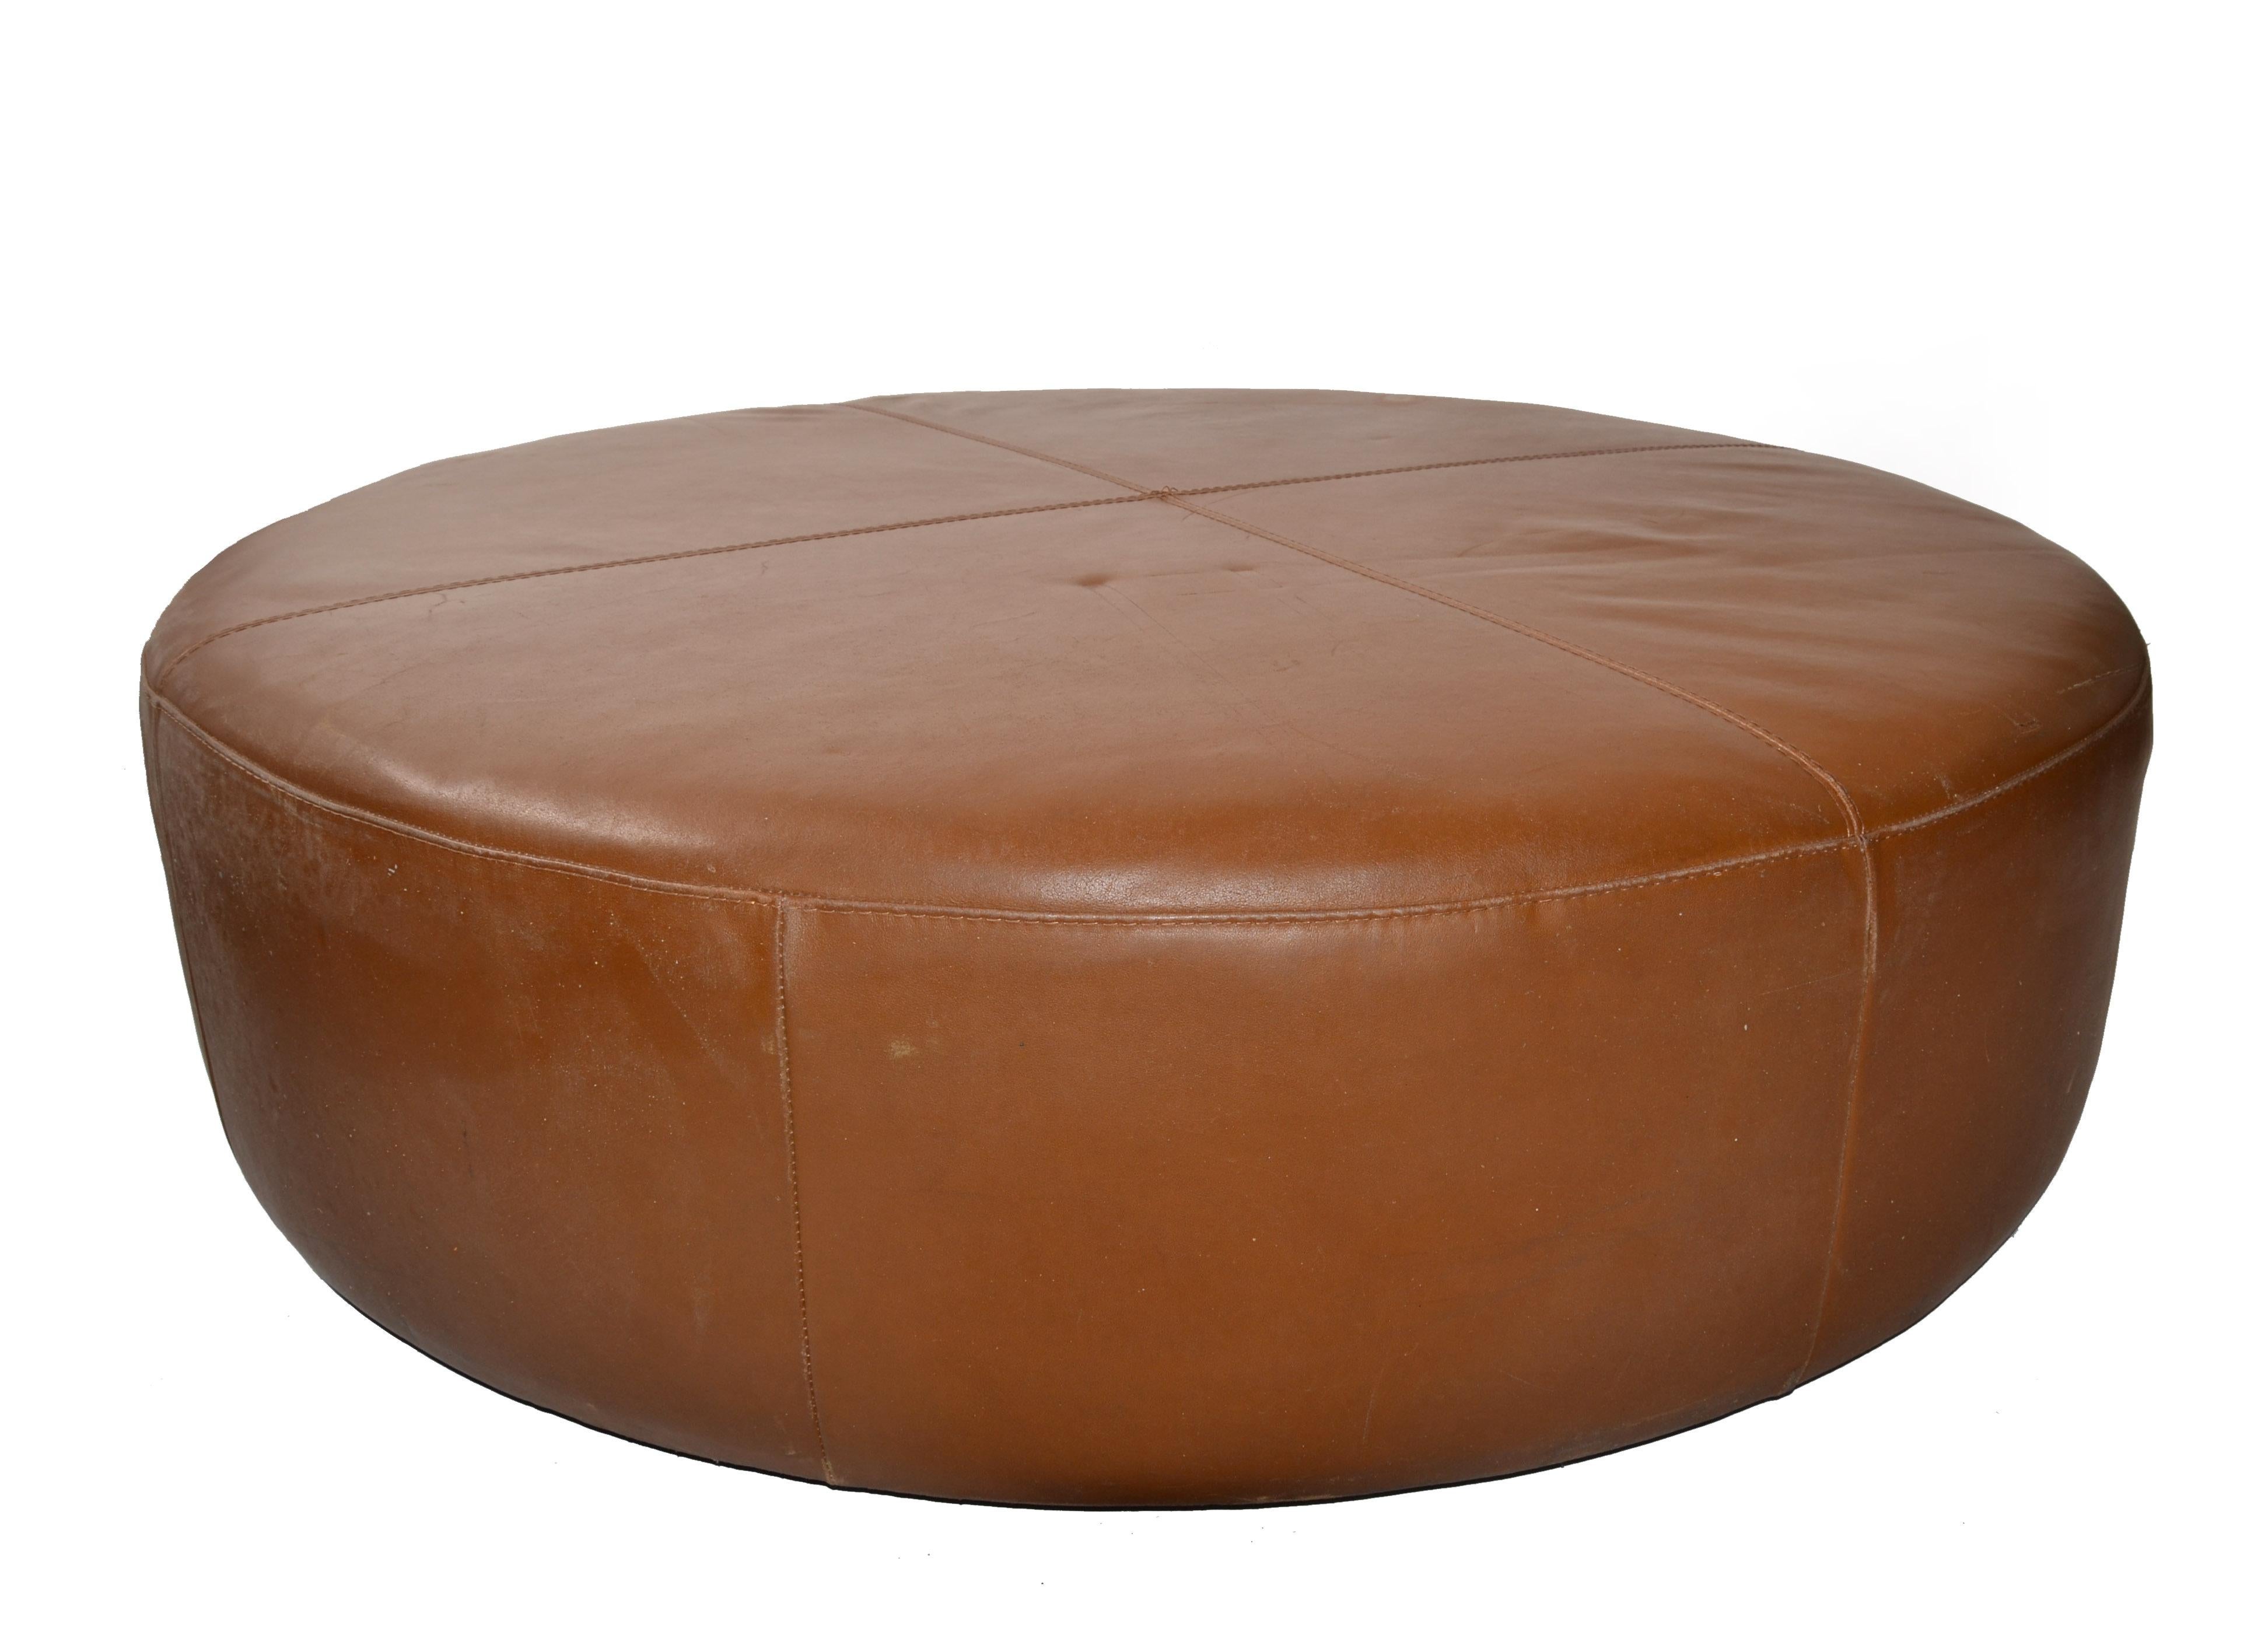 This Mid-Century Modern oversized round footstool from the late 1980s is a comfortable Center Seating with a sewn cross pattern made of brown patent leather, attributed to the Harry Large Ottoman which was created by Italian designer Antonio